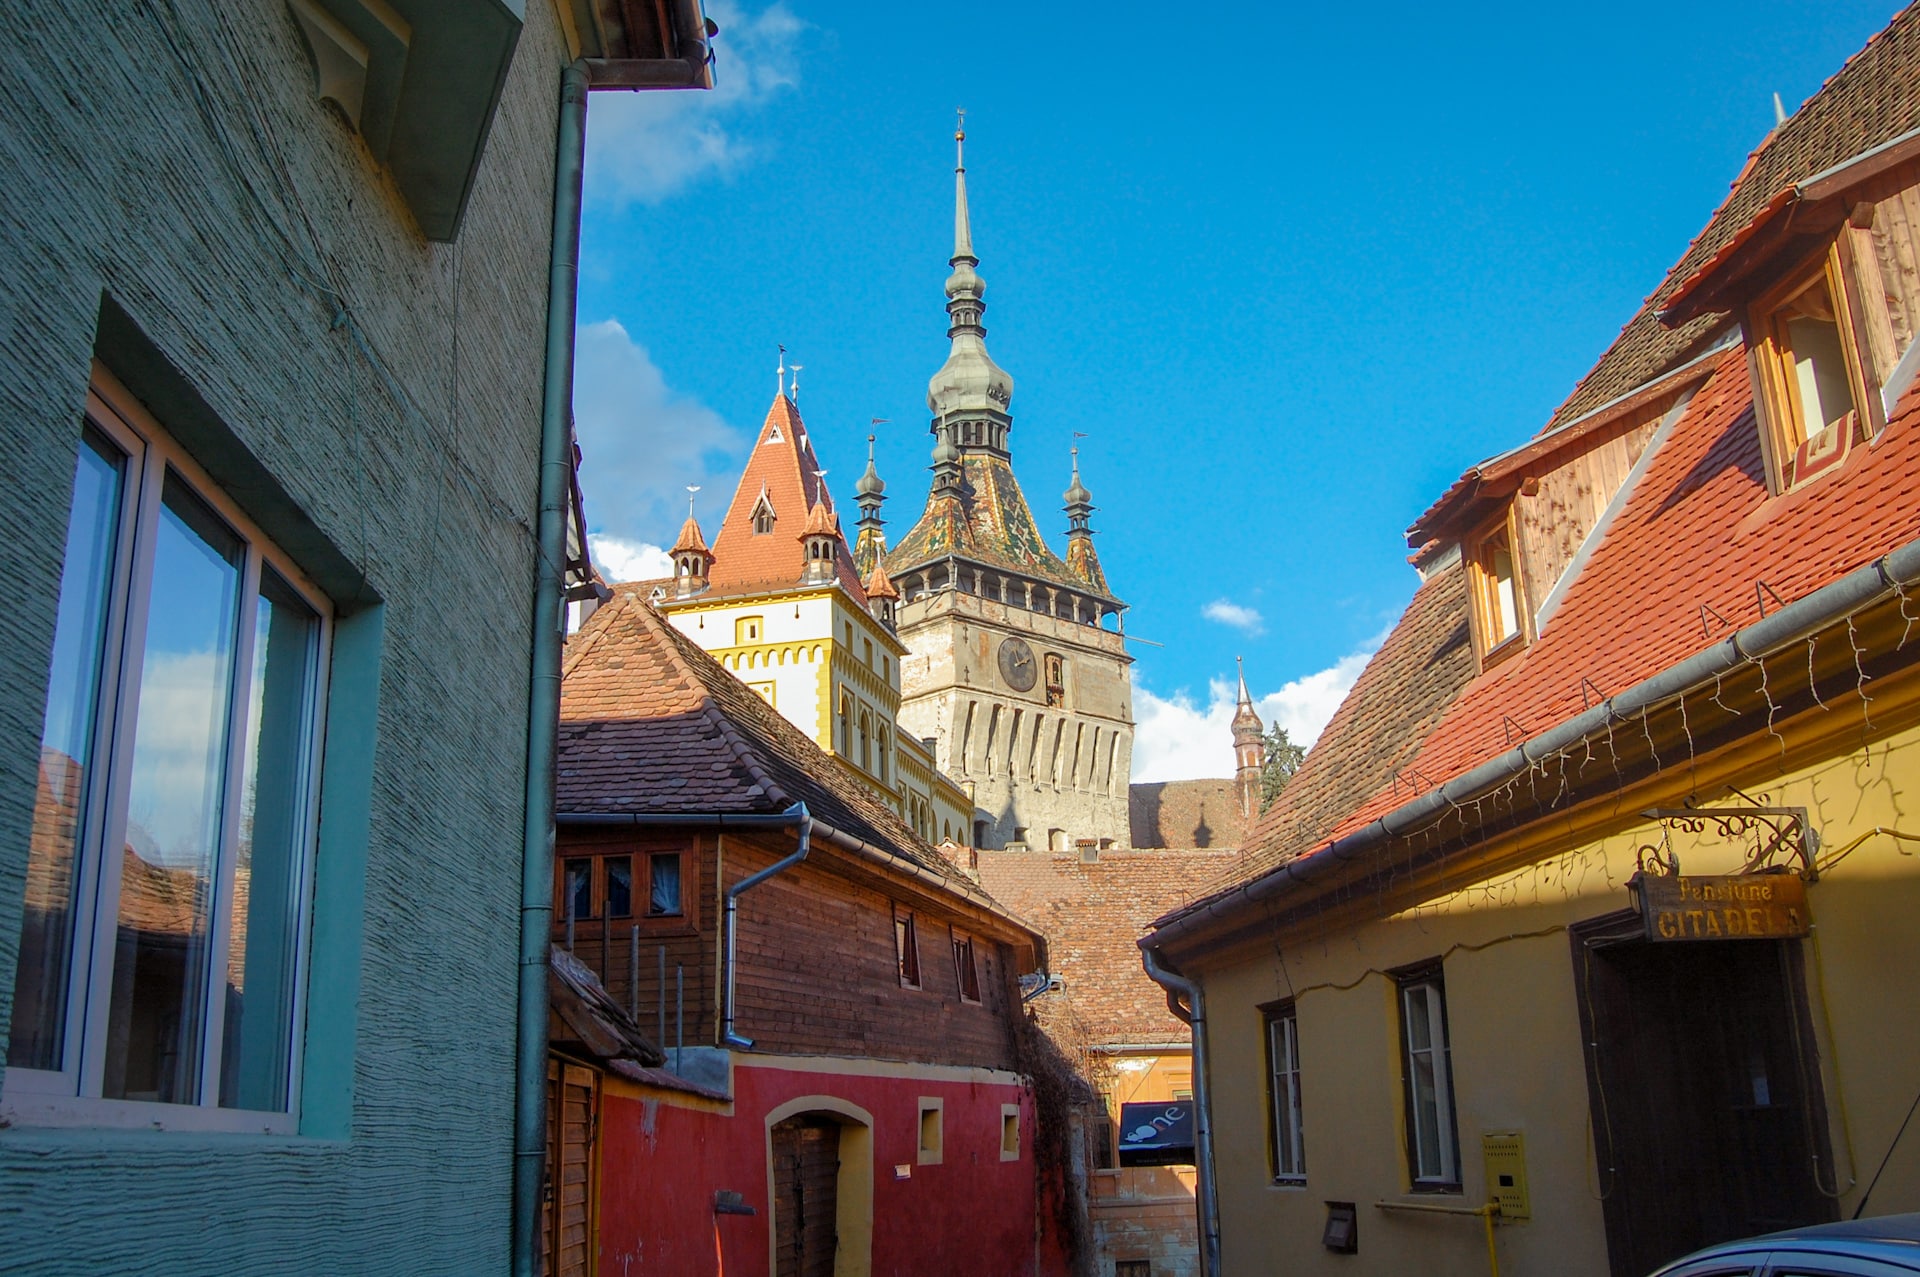 View of Sighisoara, home to the Saxon cemetery